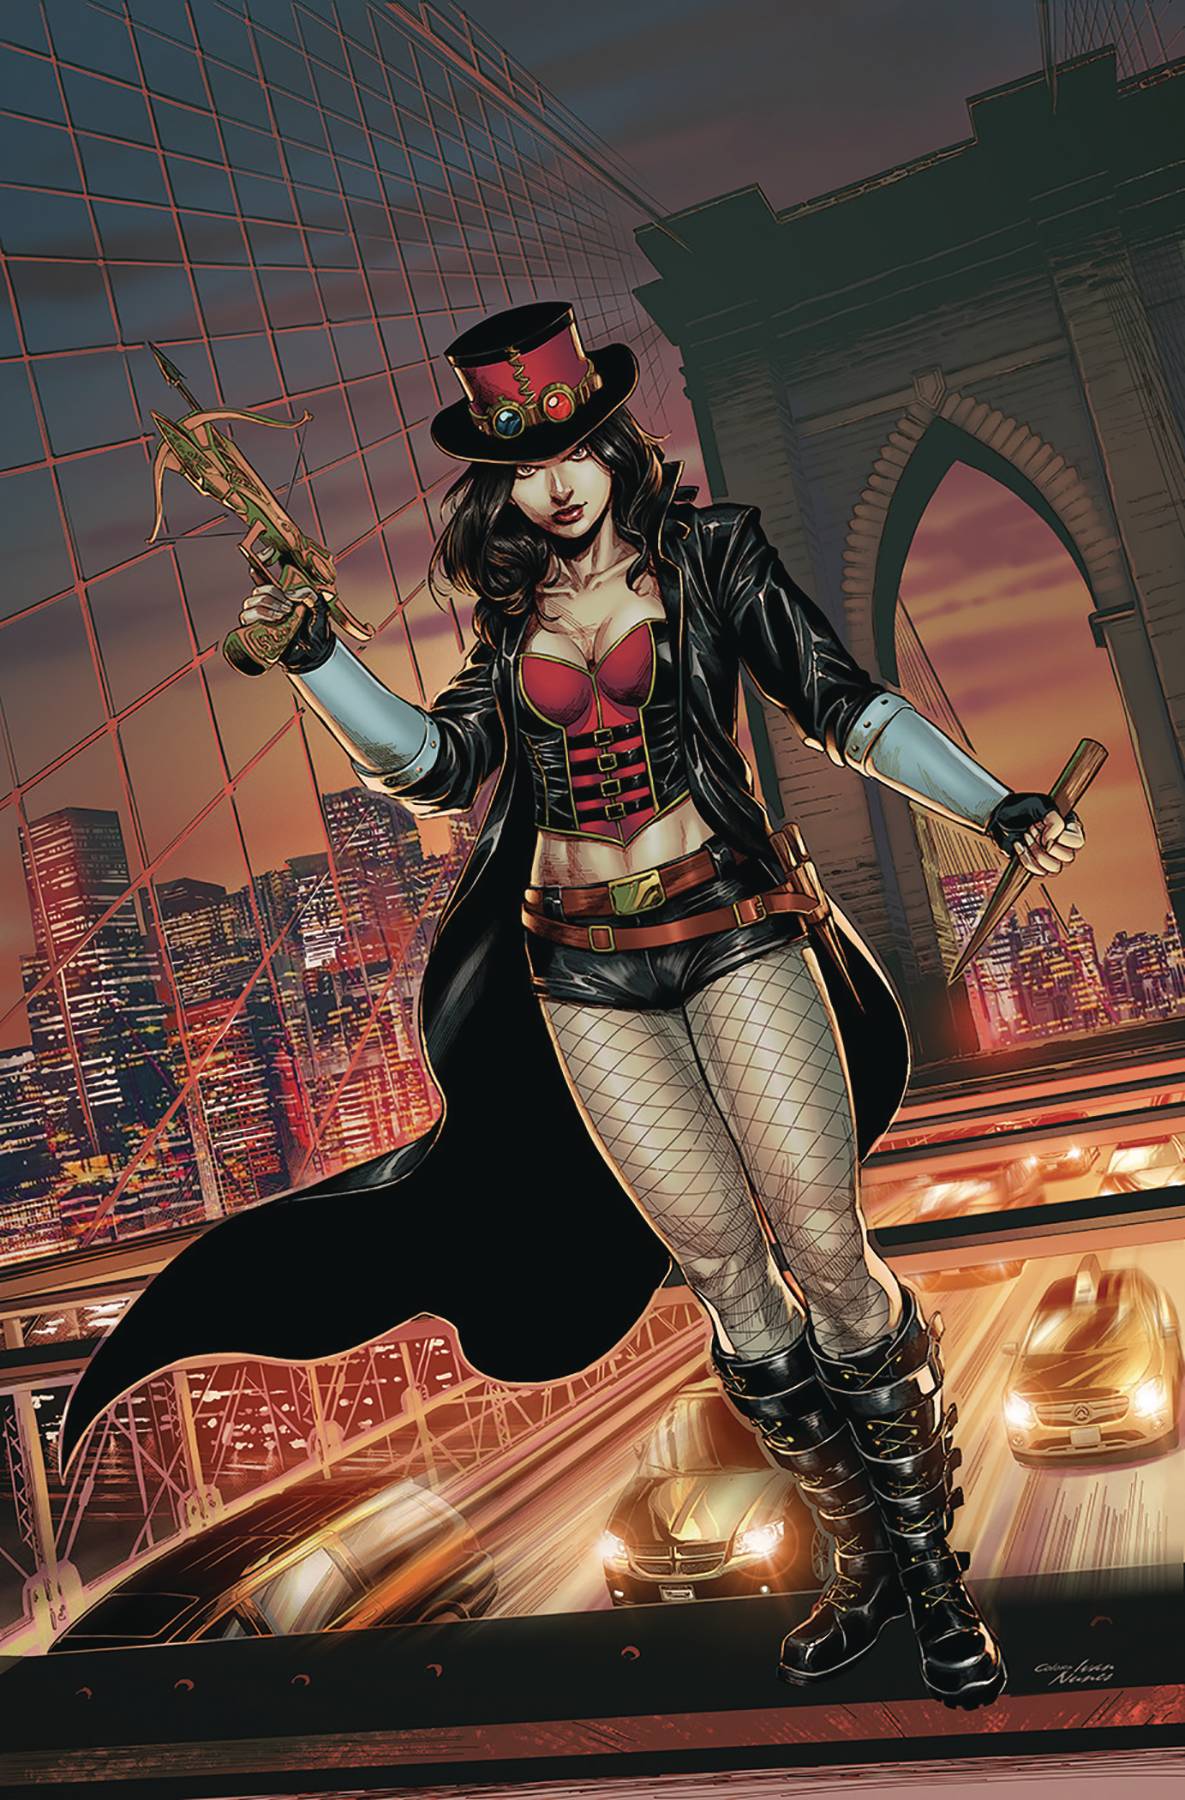 Van Helsing Vs Draculas Daughter #1 Cover A Coccolo (Of 5)